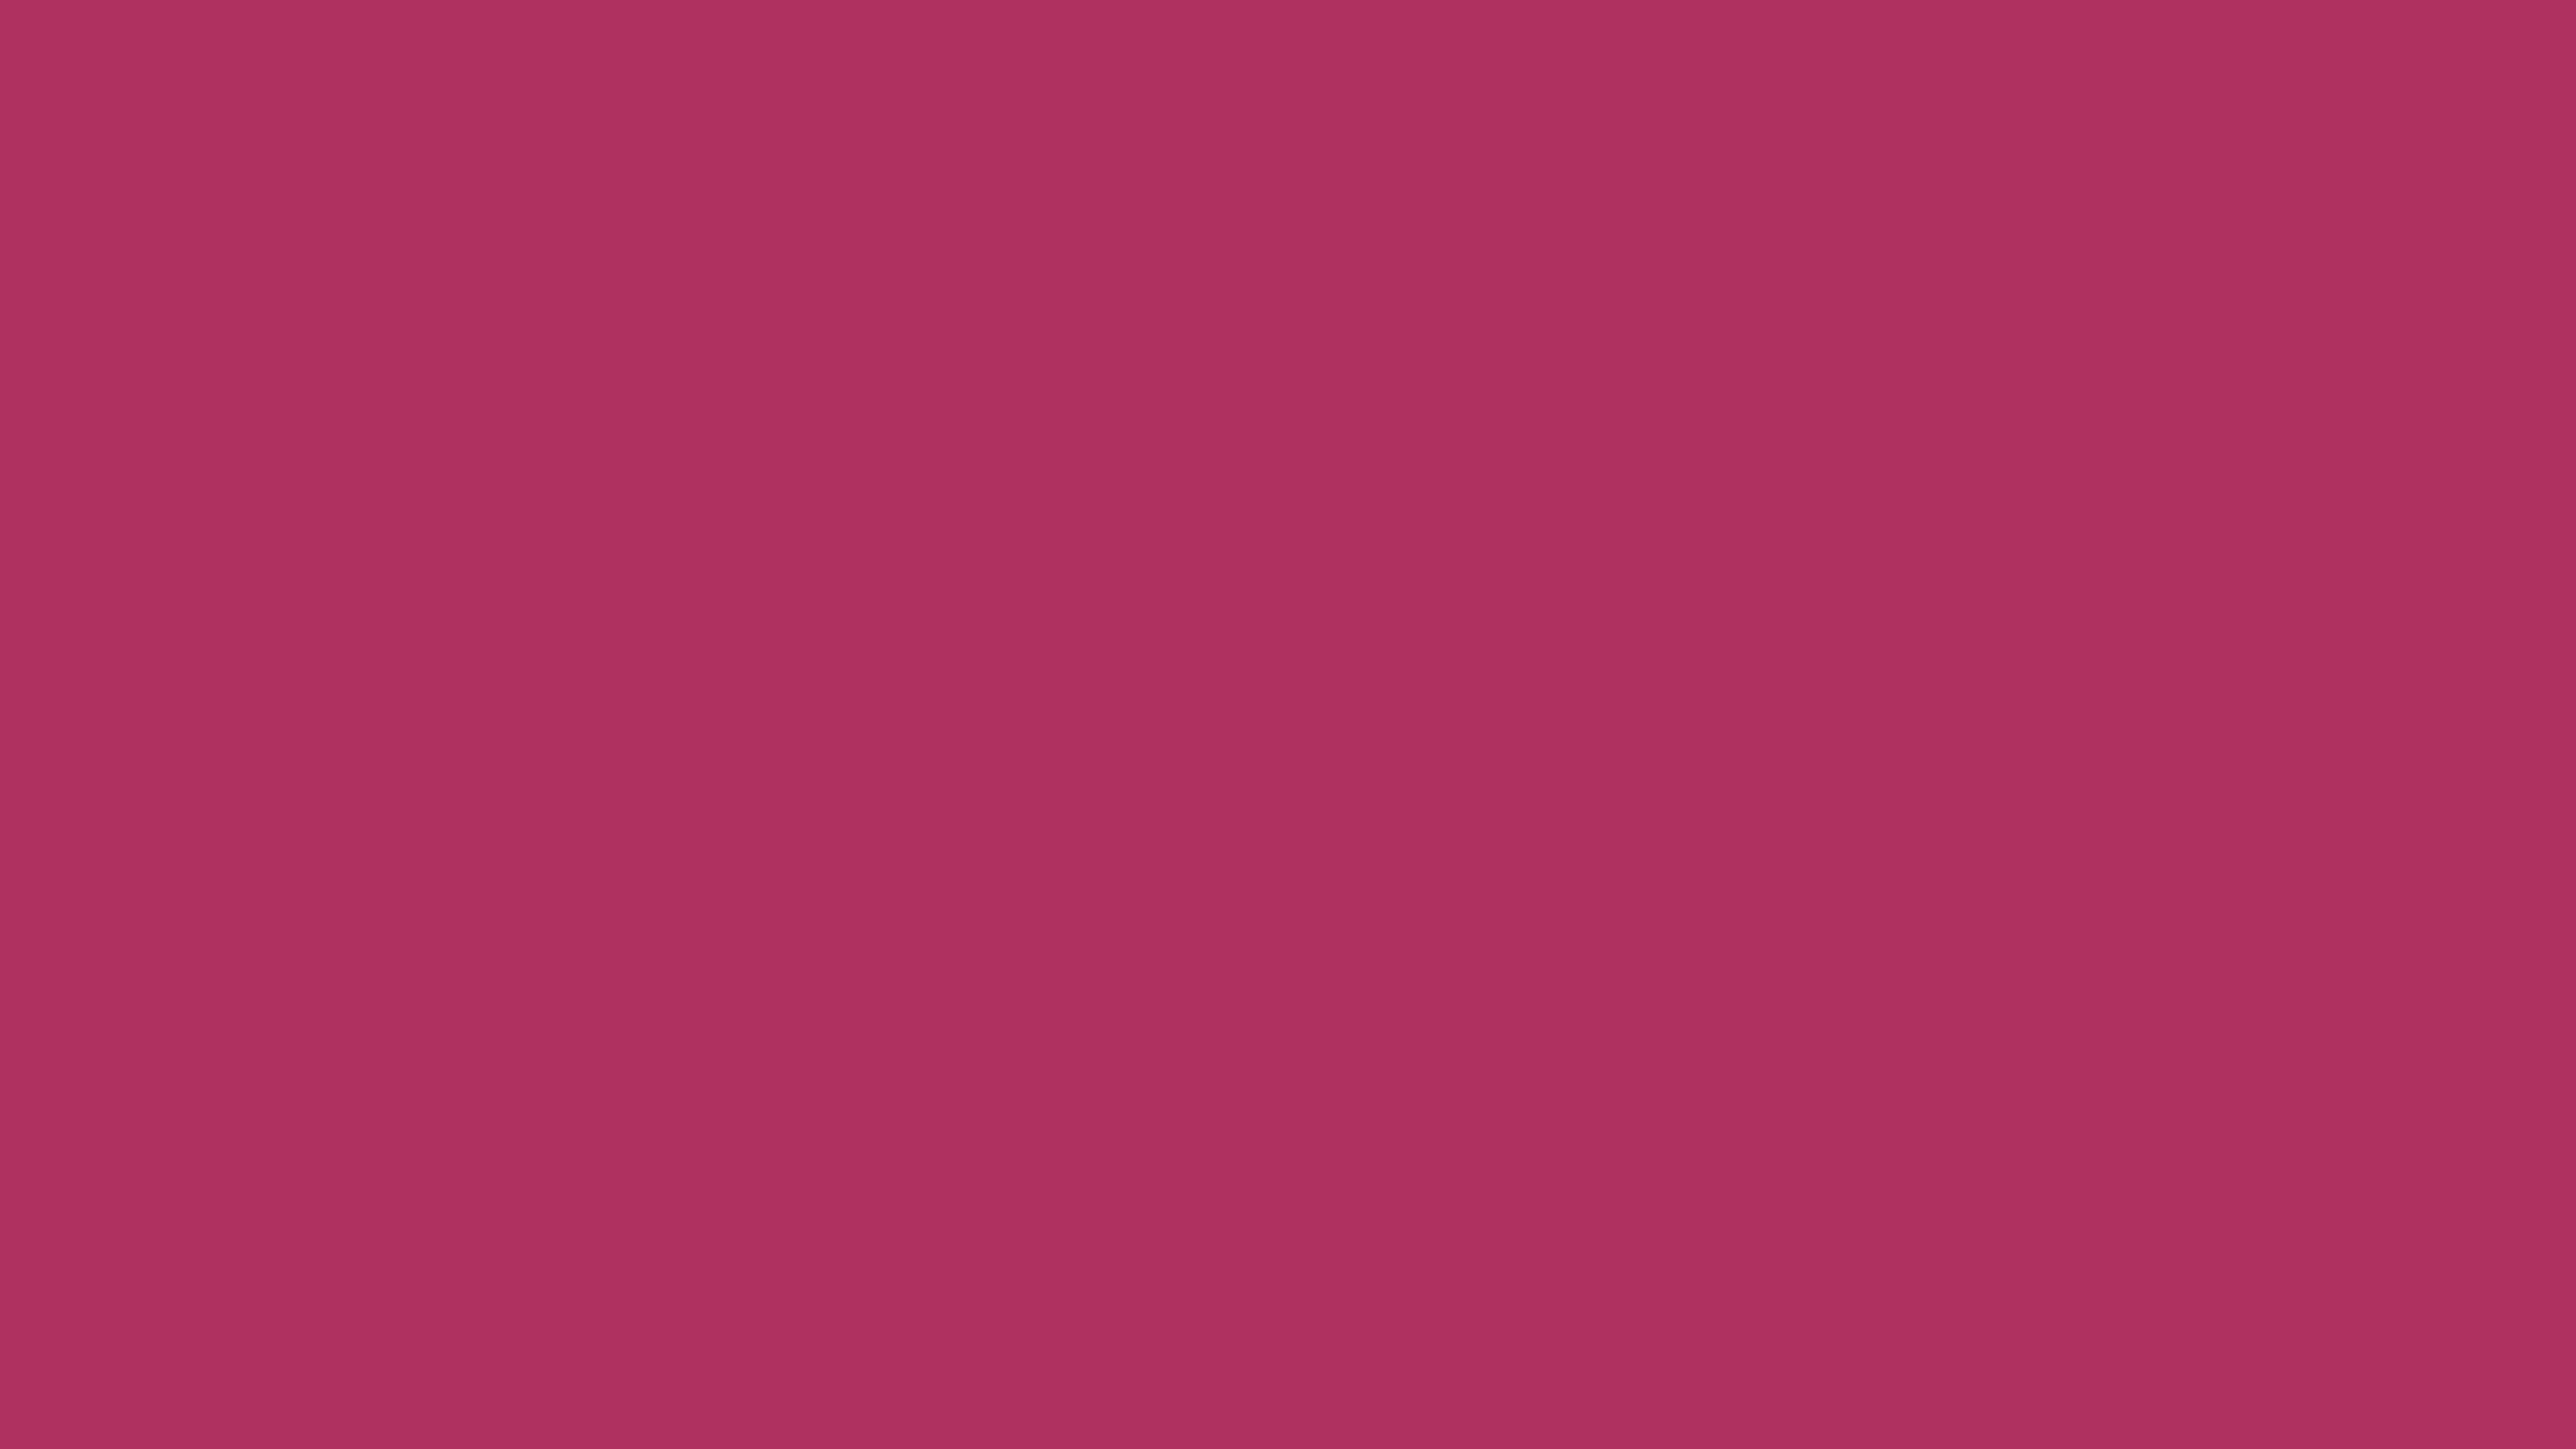 7680x4320 Rich Maroon Solid Color Background